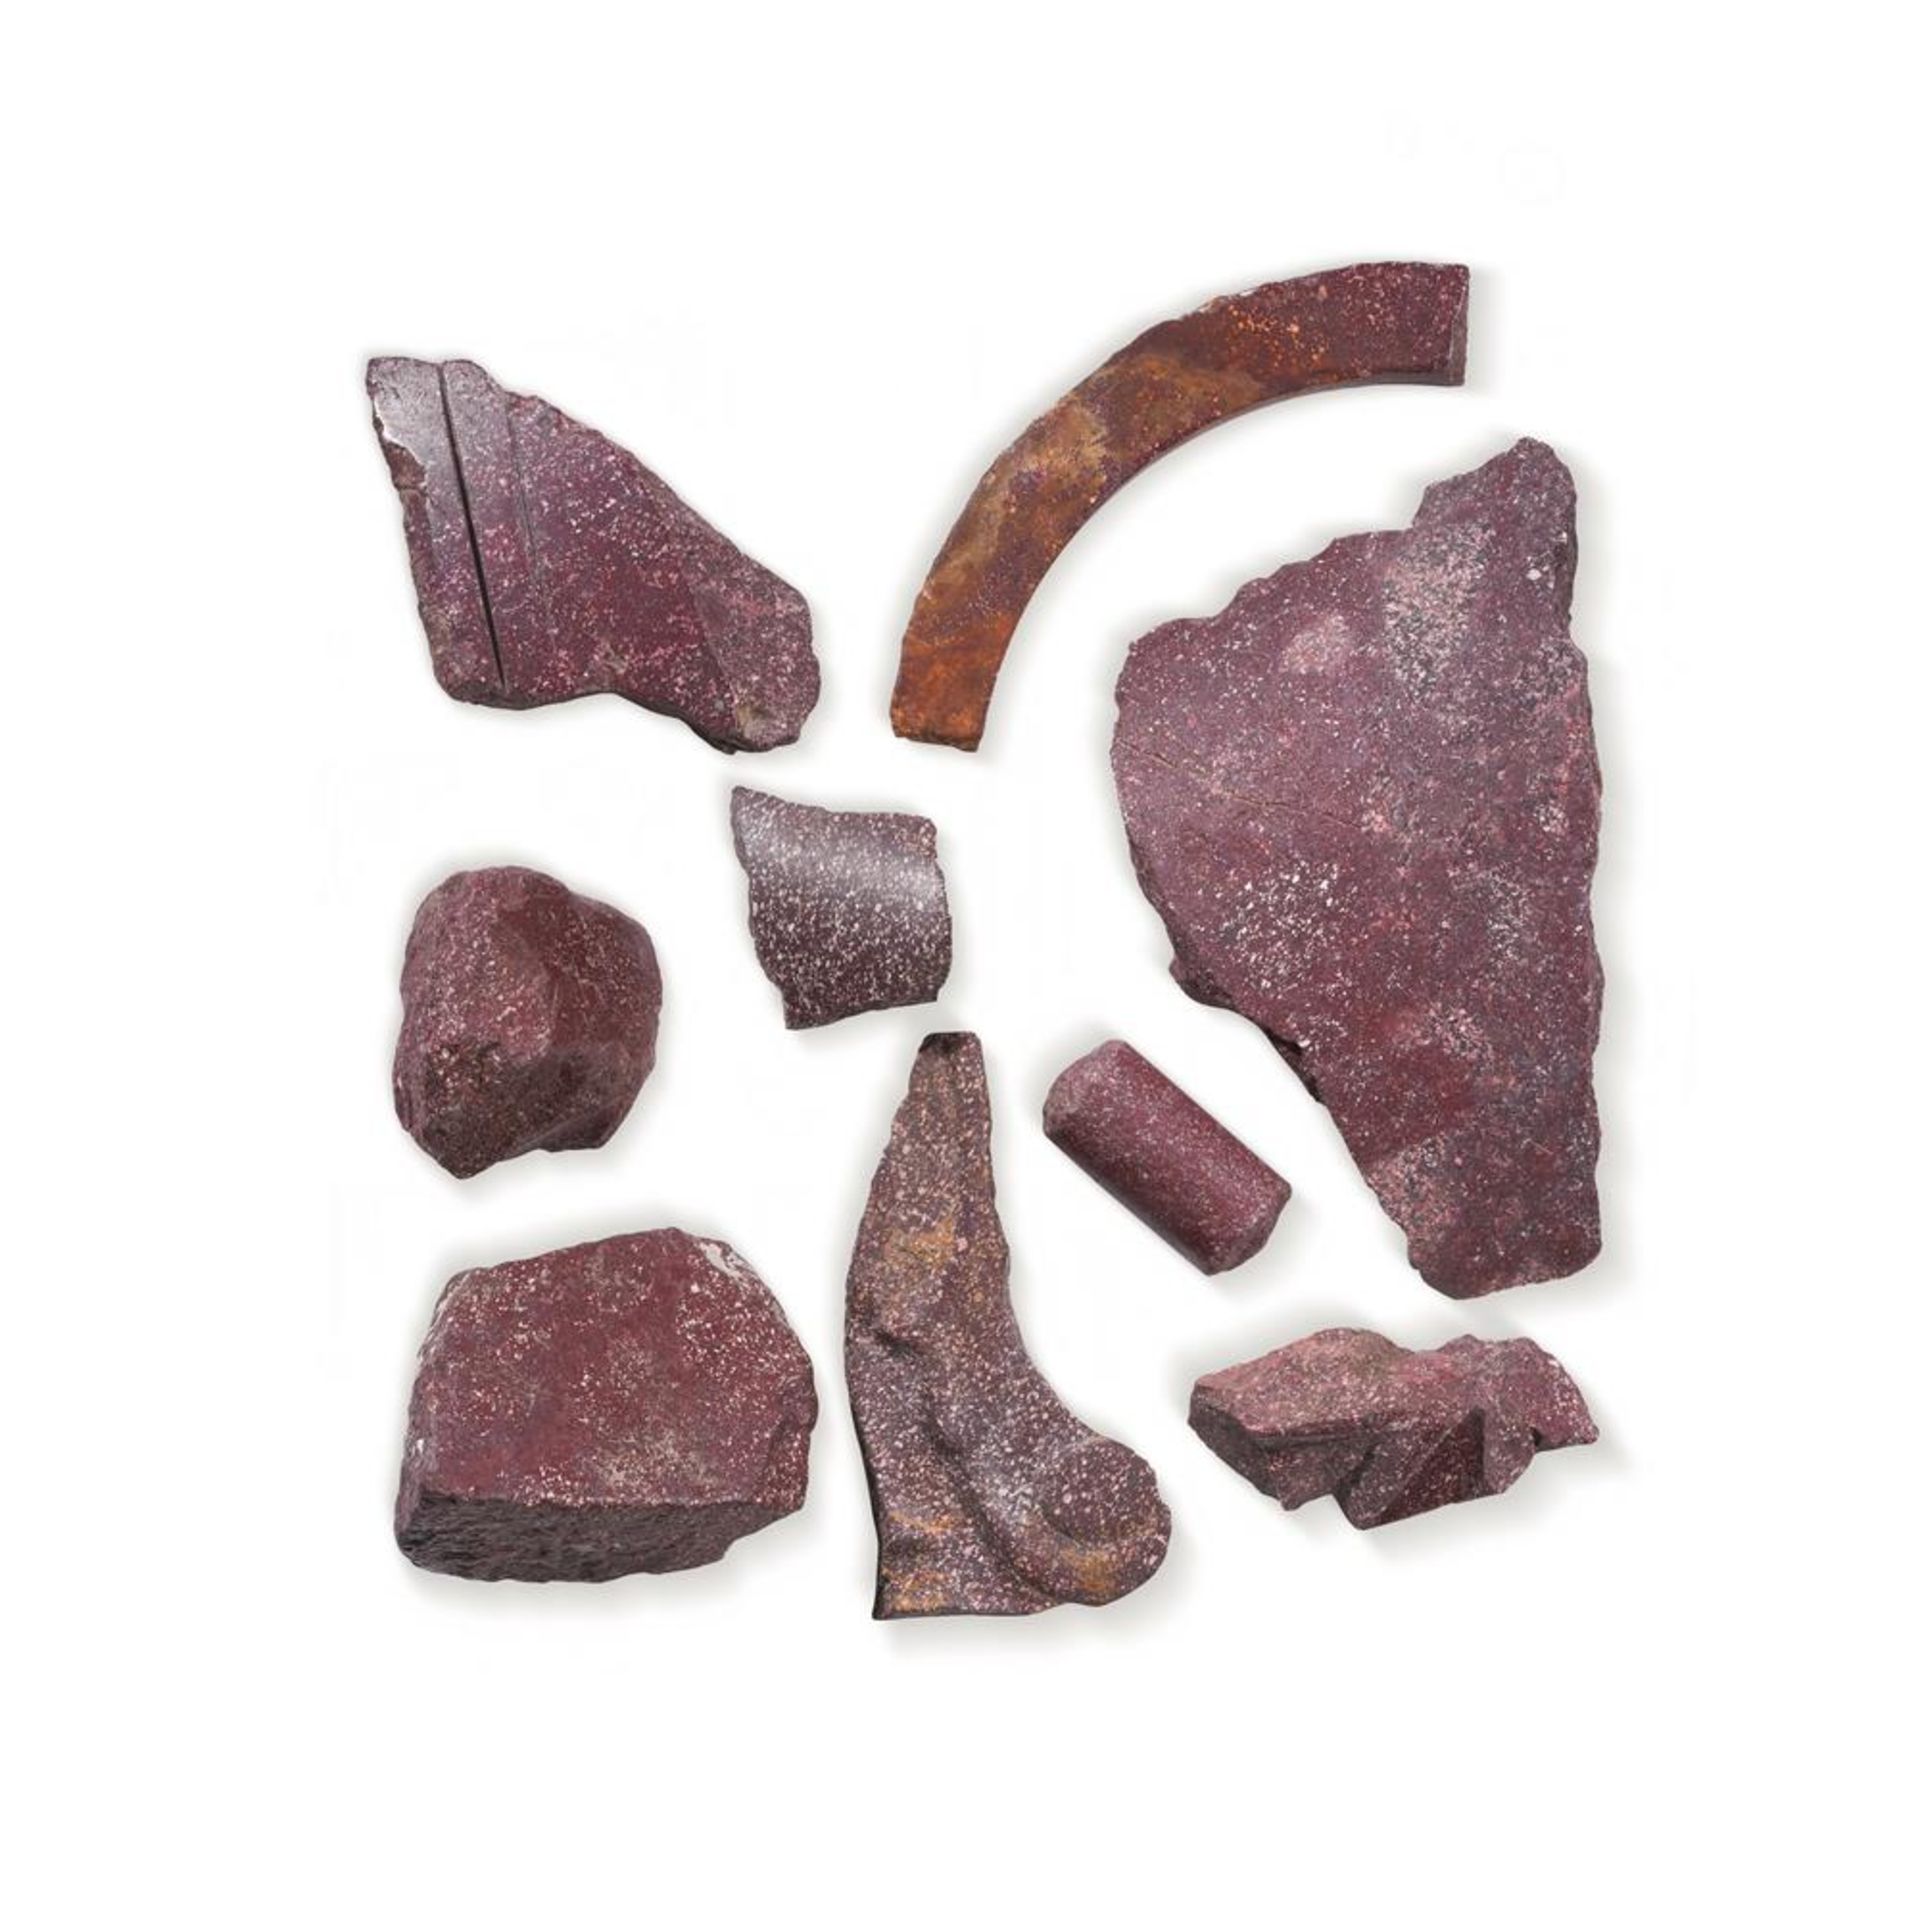 A GROUP OF ROMAN ARCHITECTURAL FRAGMENTS OF PORPHYRY, 1ST/2ND CENTURY A.D.